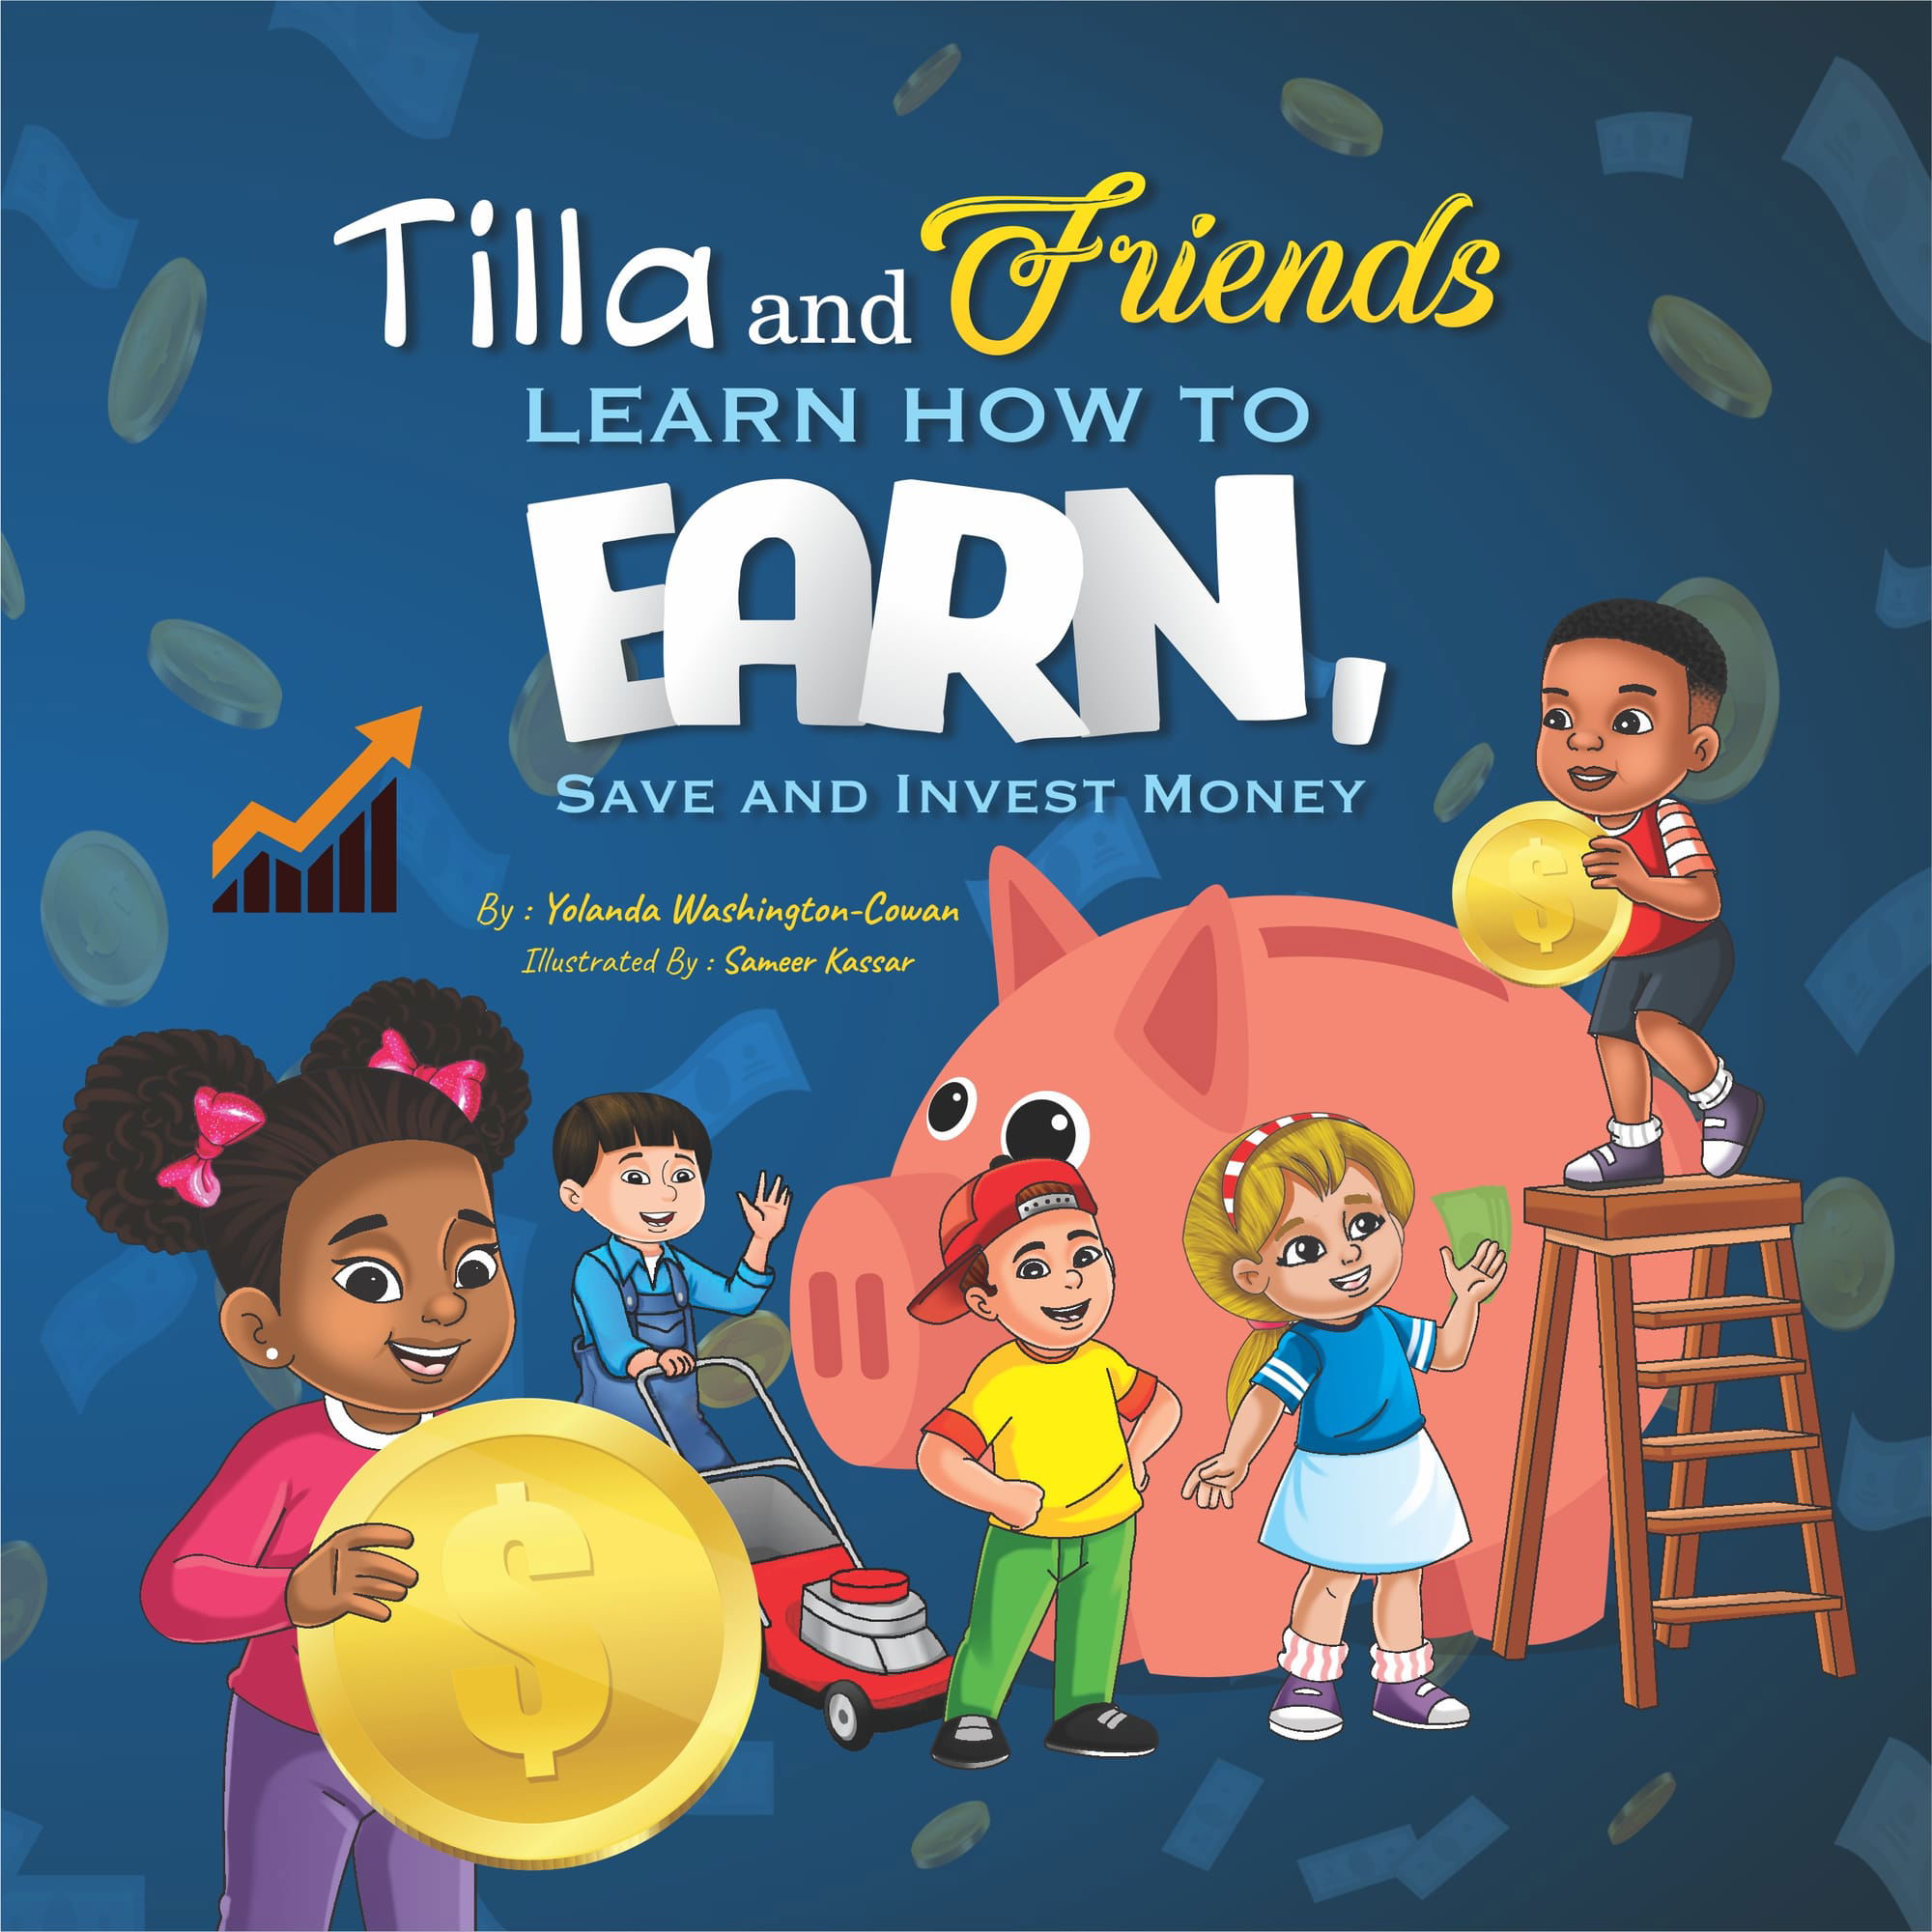 Coming Soon: Tilla and Friends Learn to Earn, Save and Invest Money.